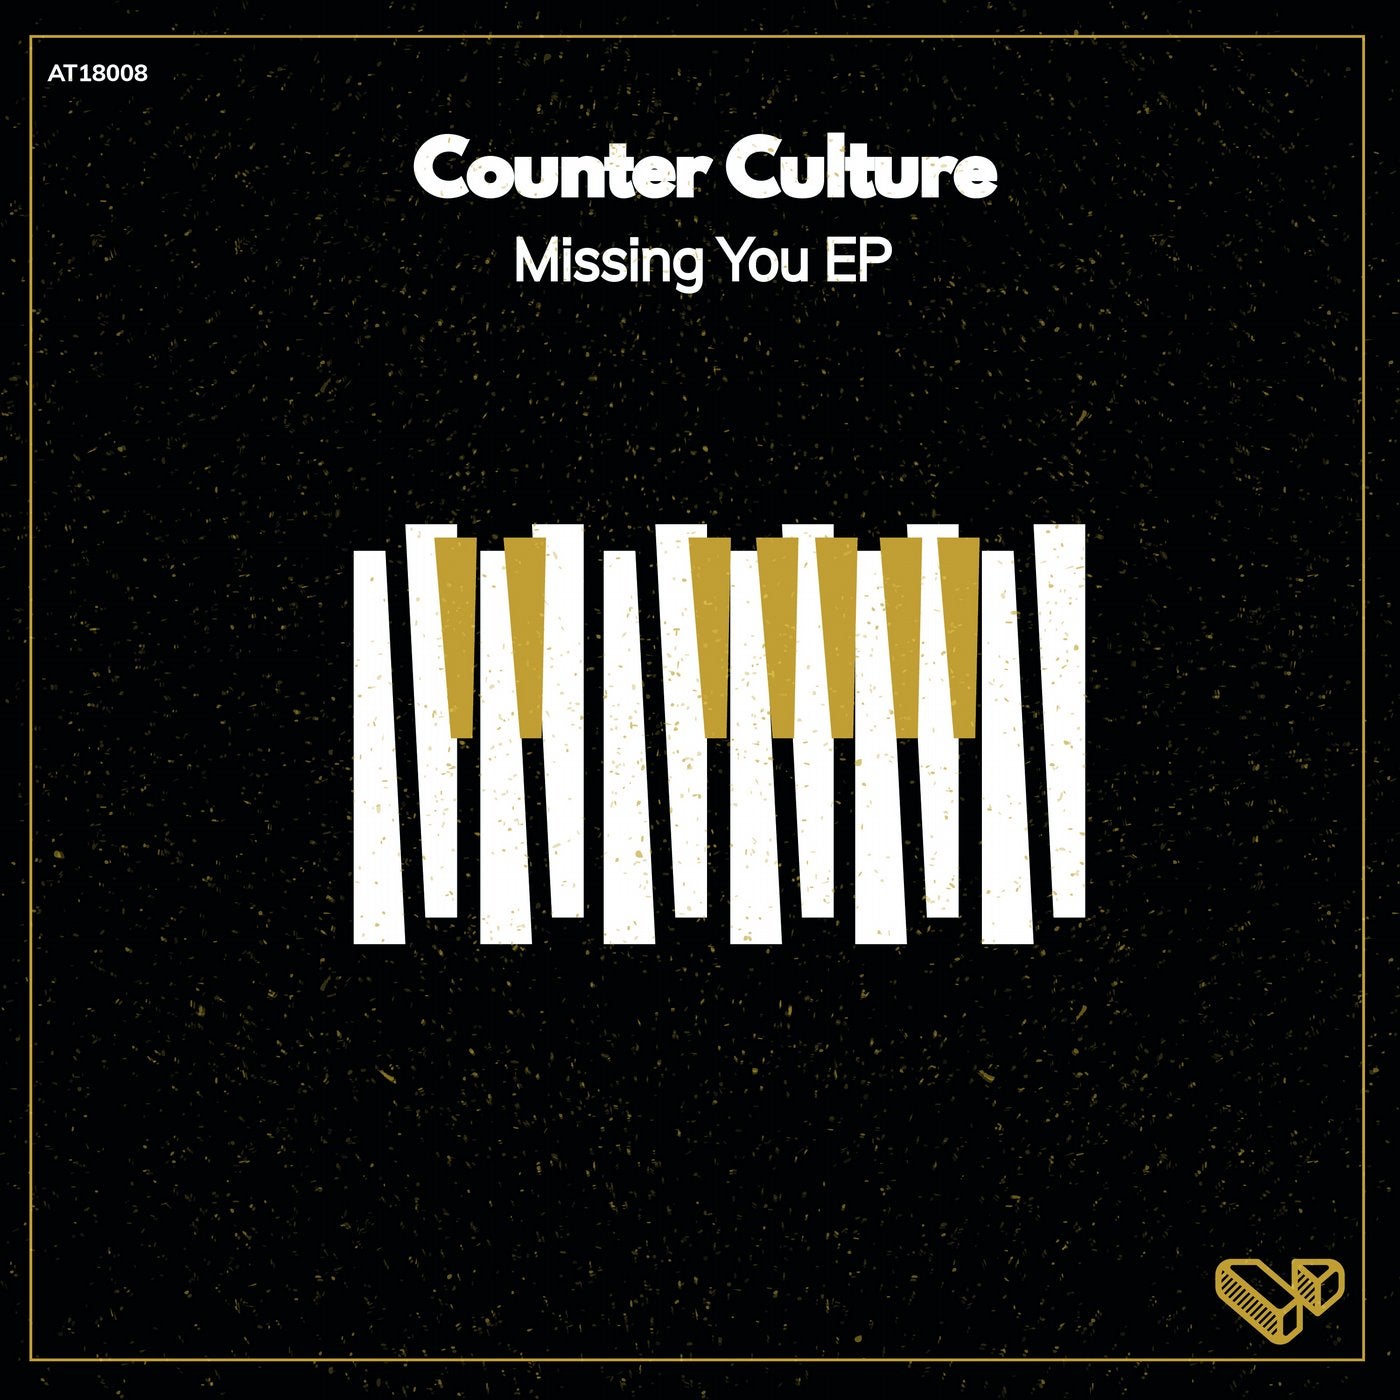 AT18008 - Counter Culture - Missing You EP